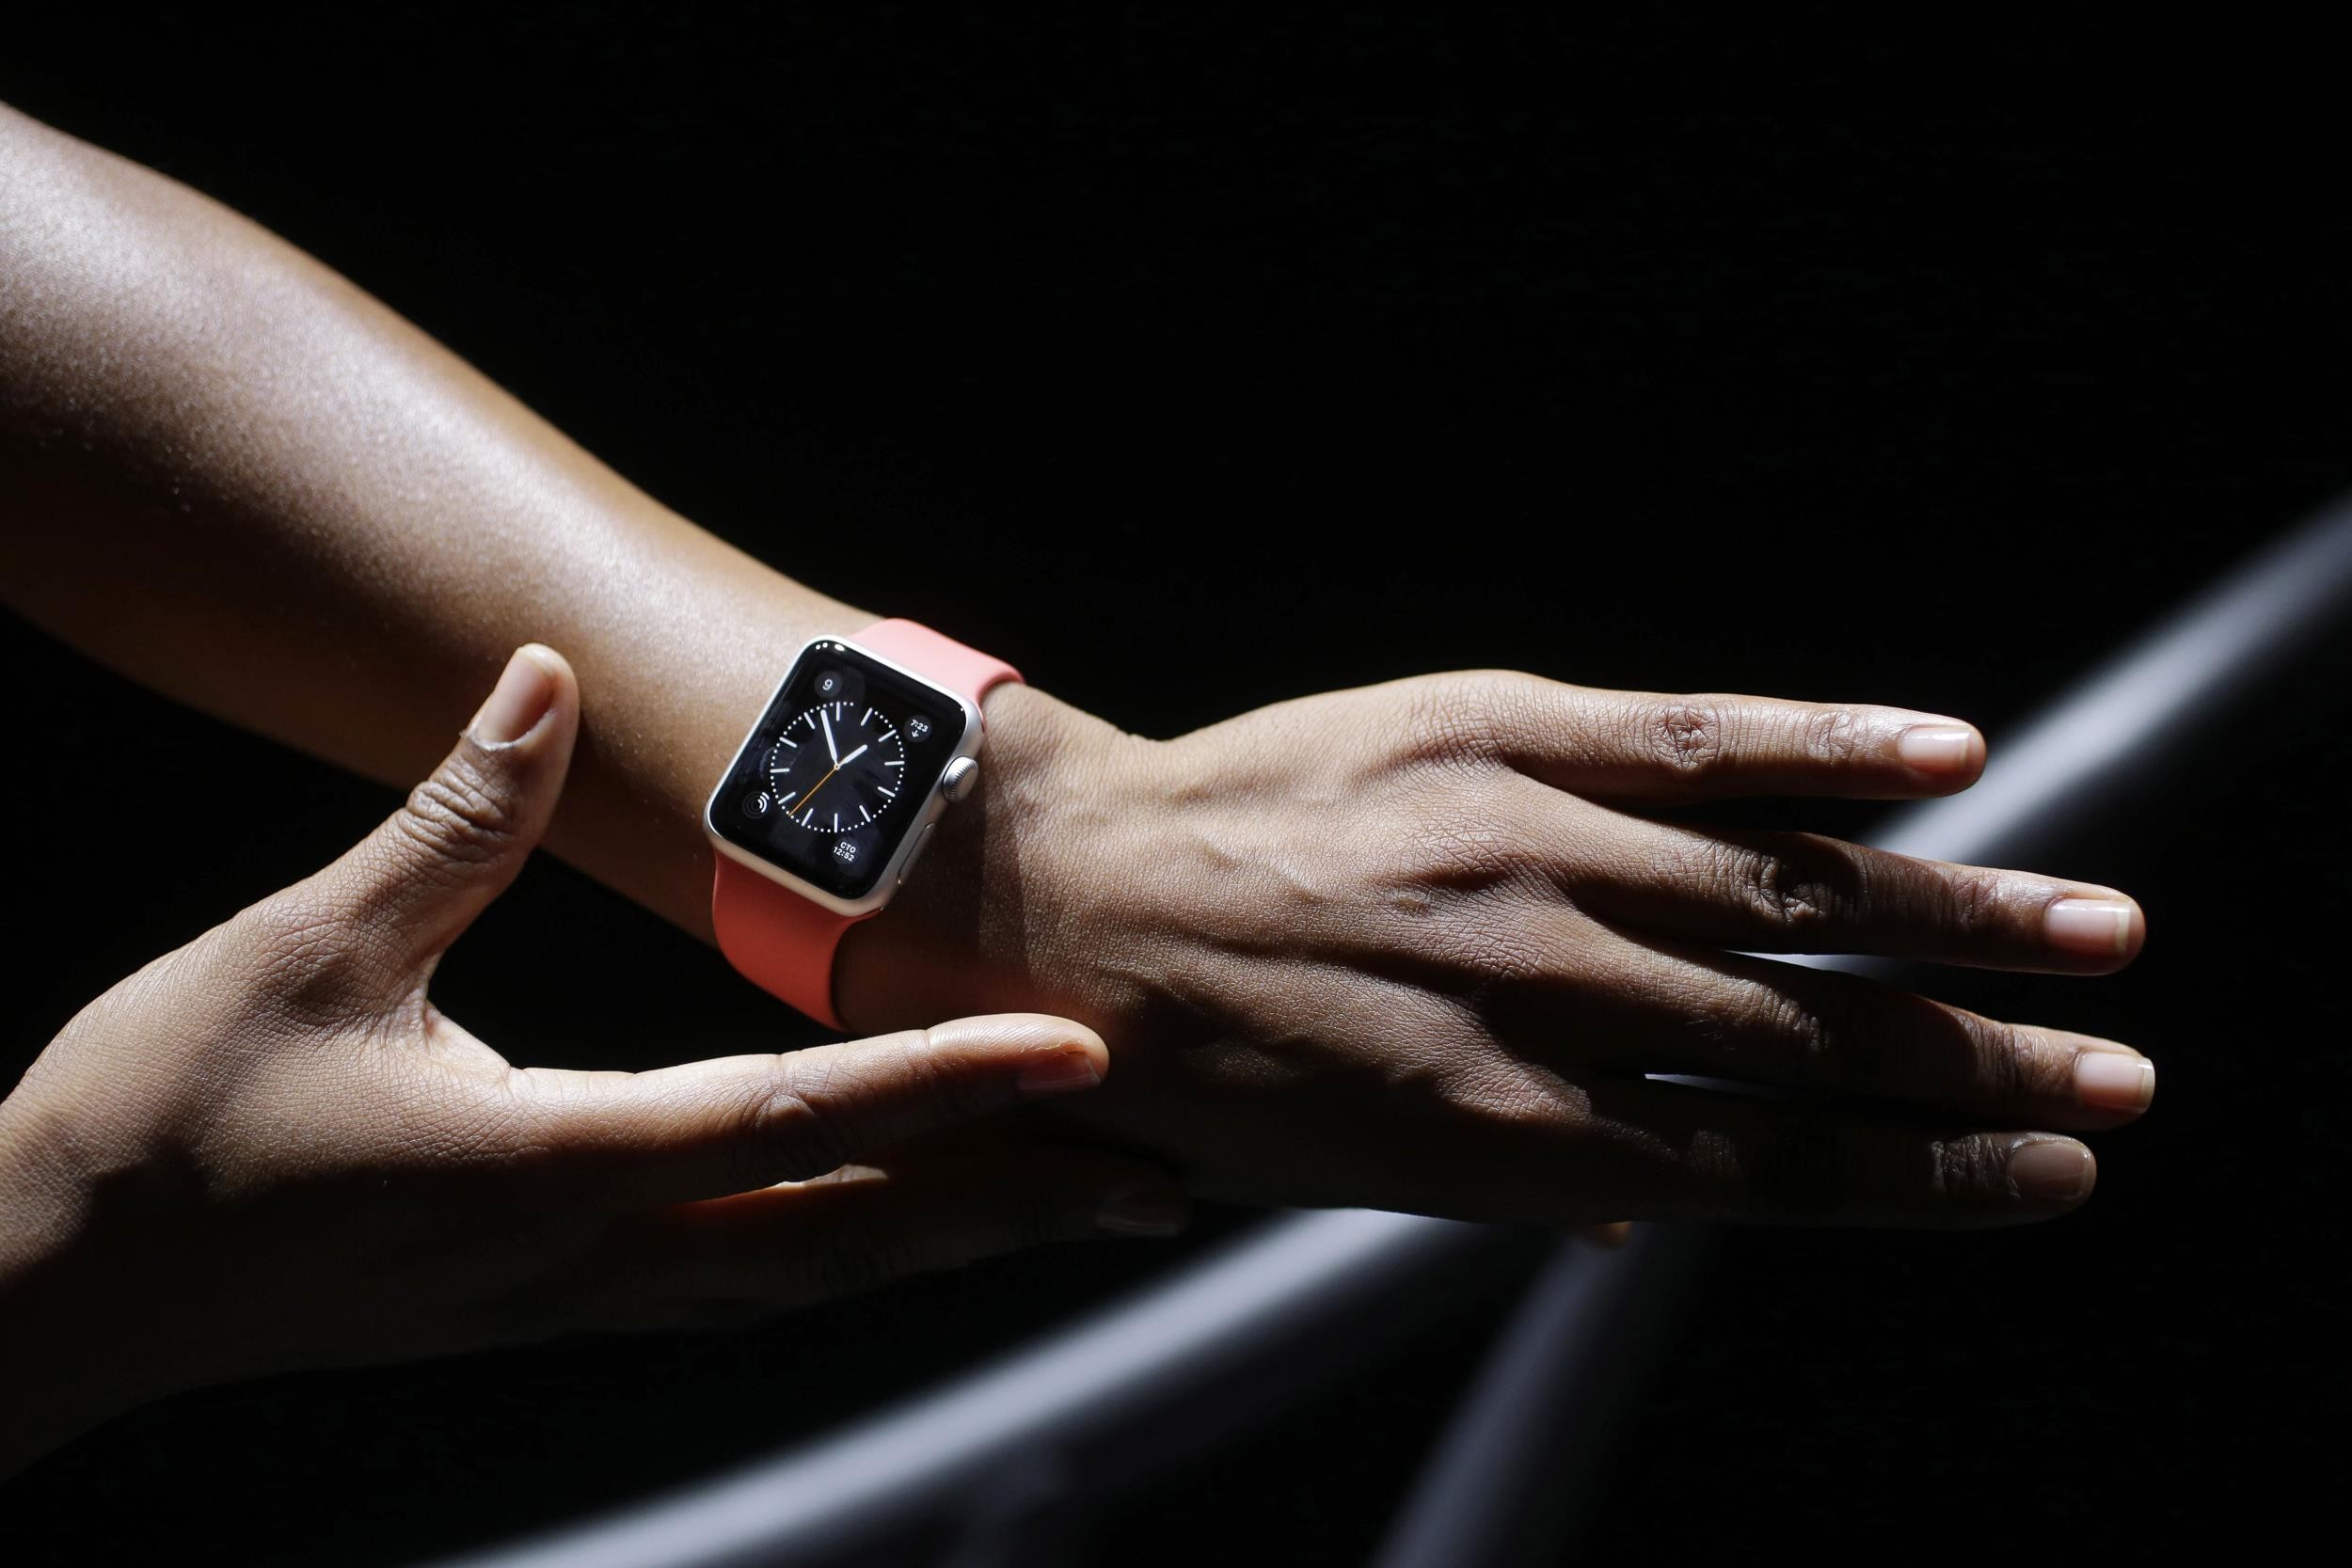 Arms Hands Apple Watch 2500x1667